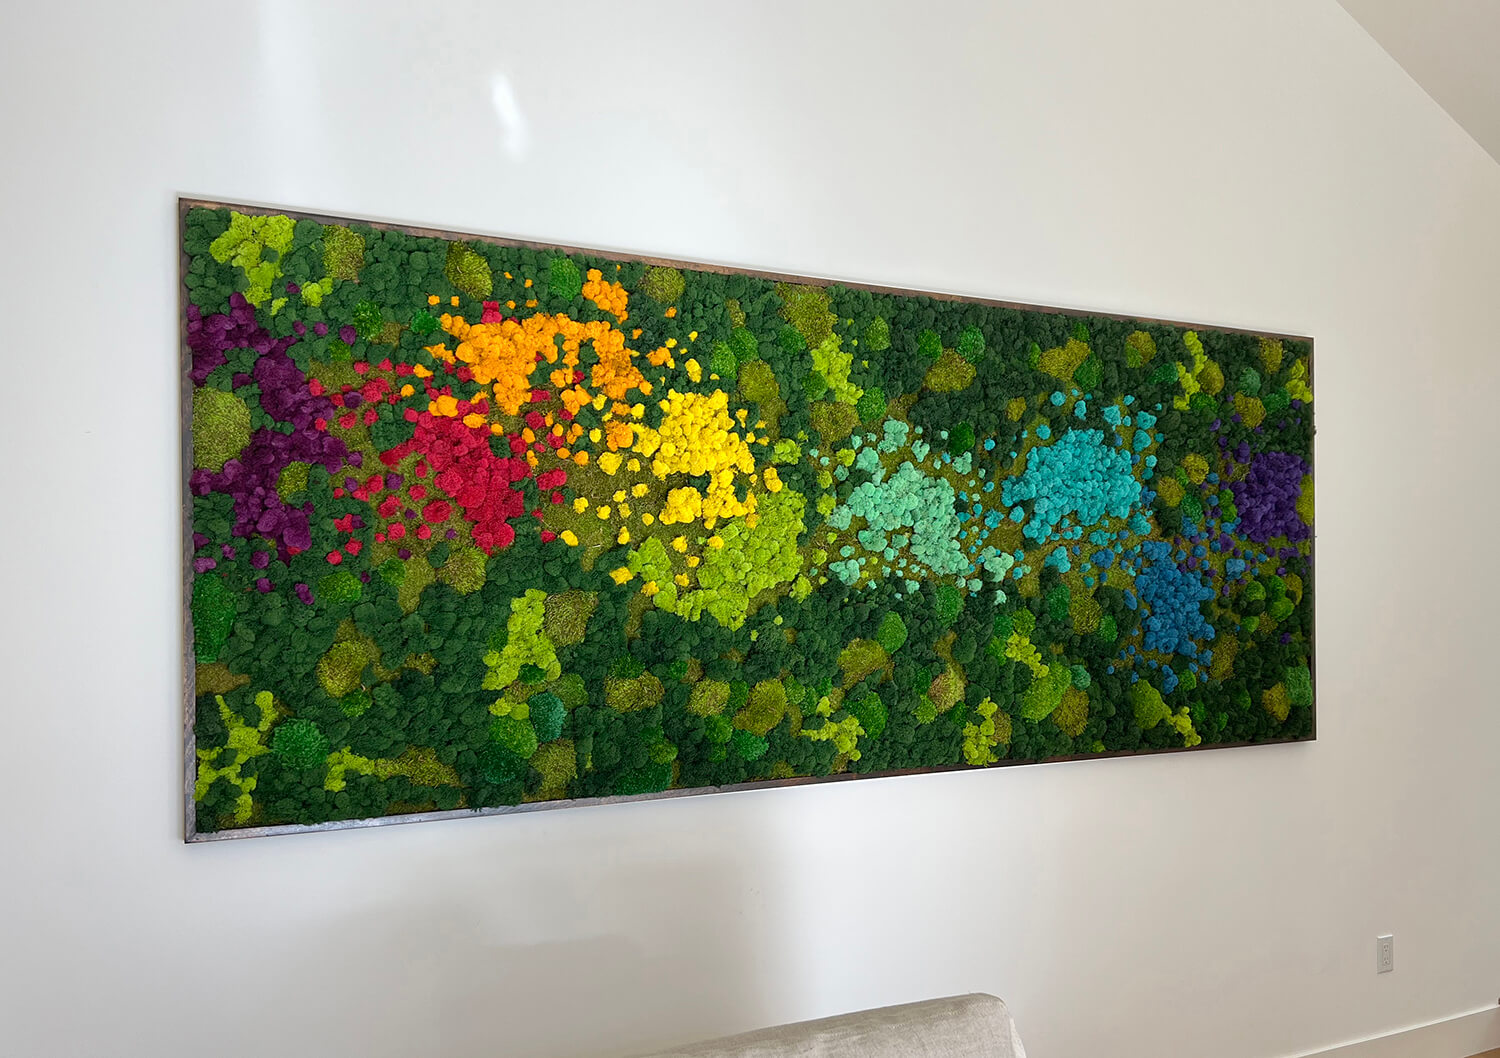 Colorful preserved wall art created with reindeer moss with many different colors creating moss abstract art.